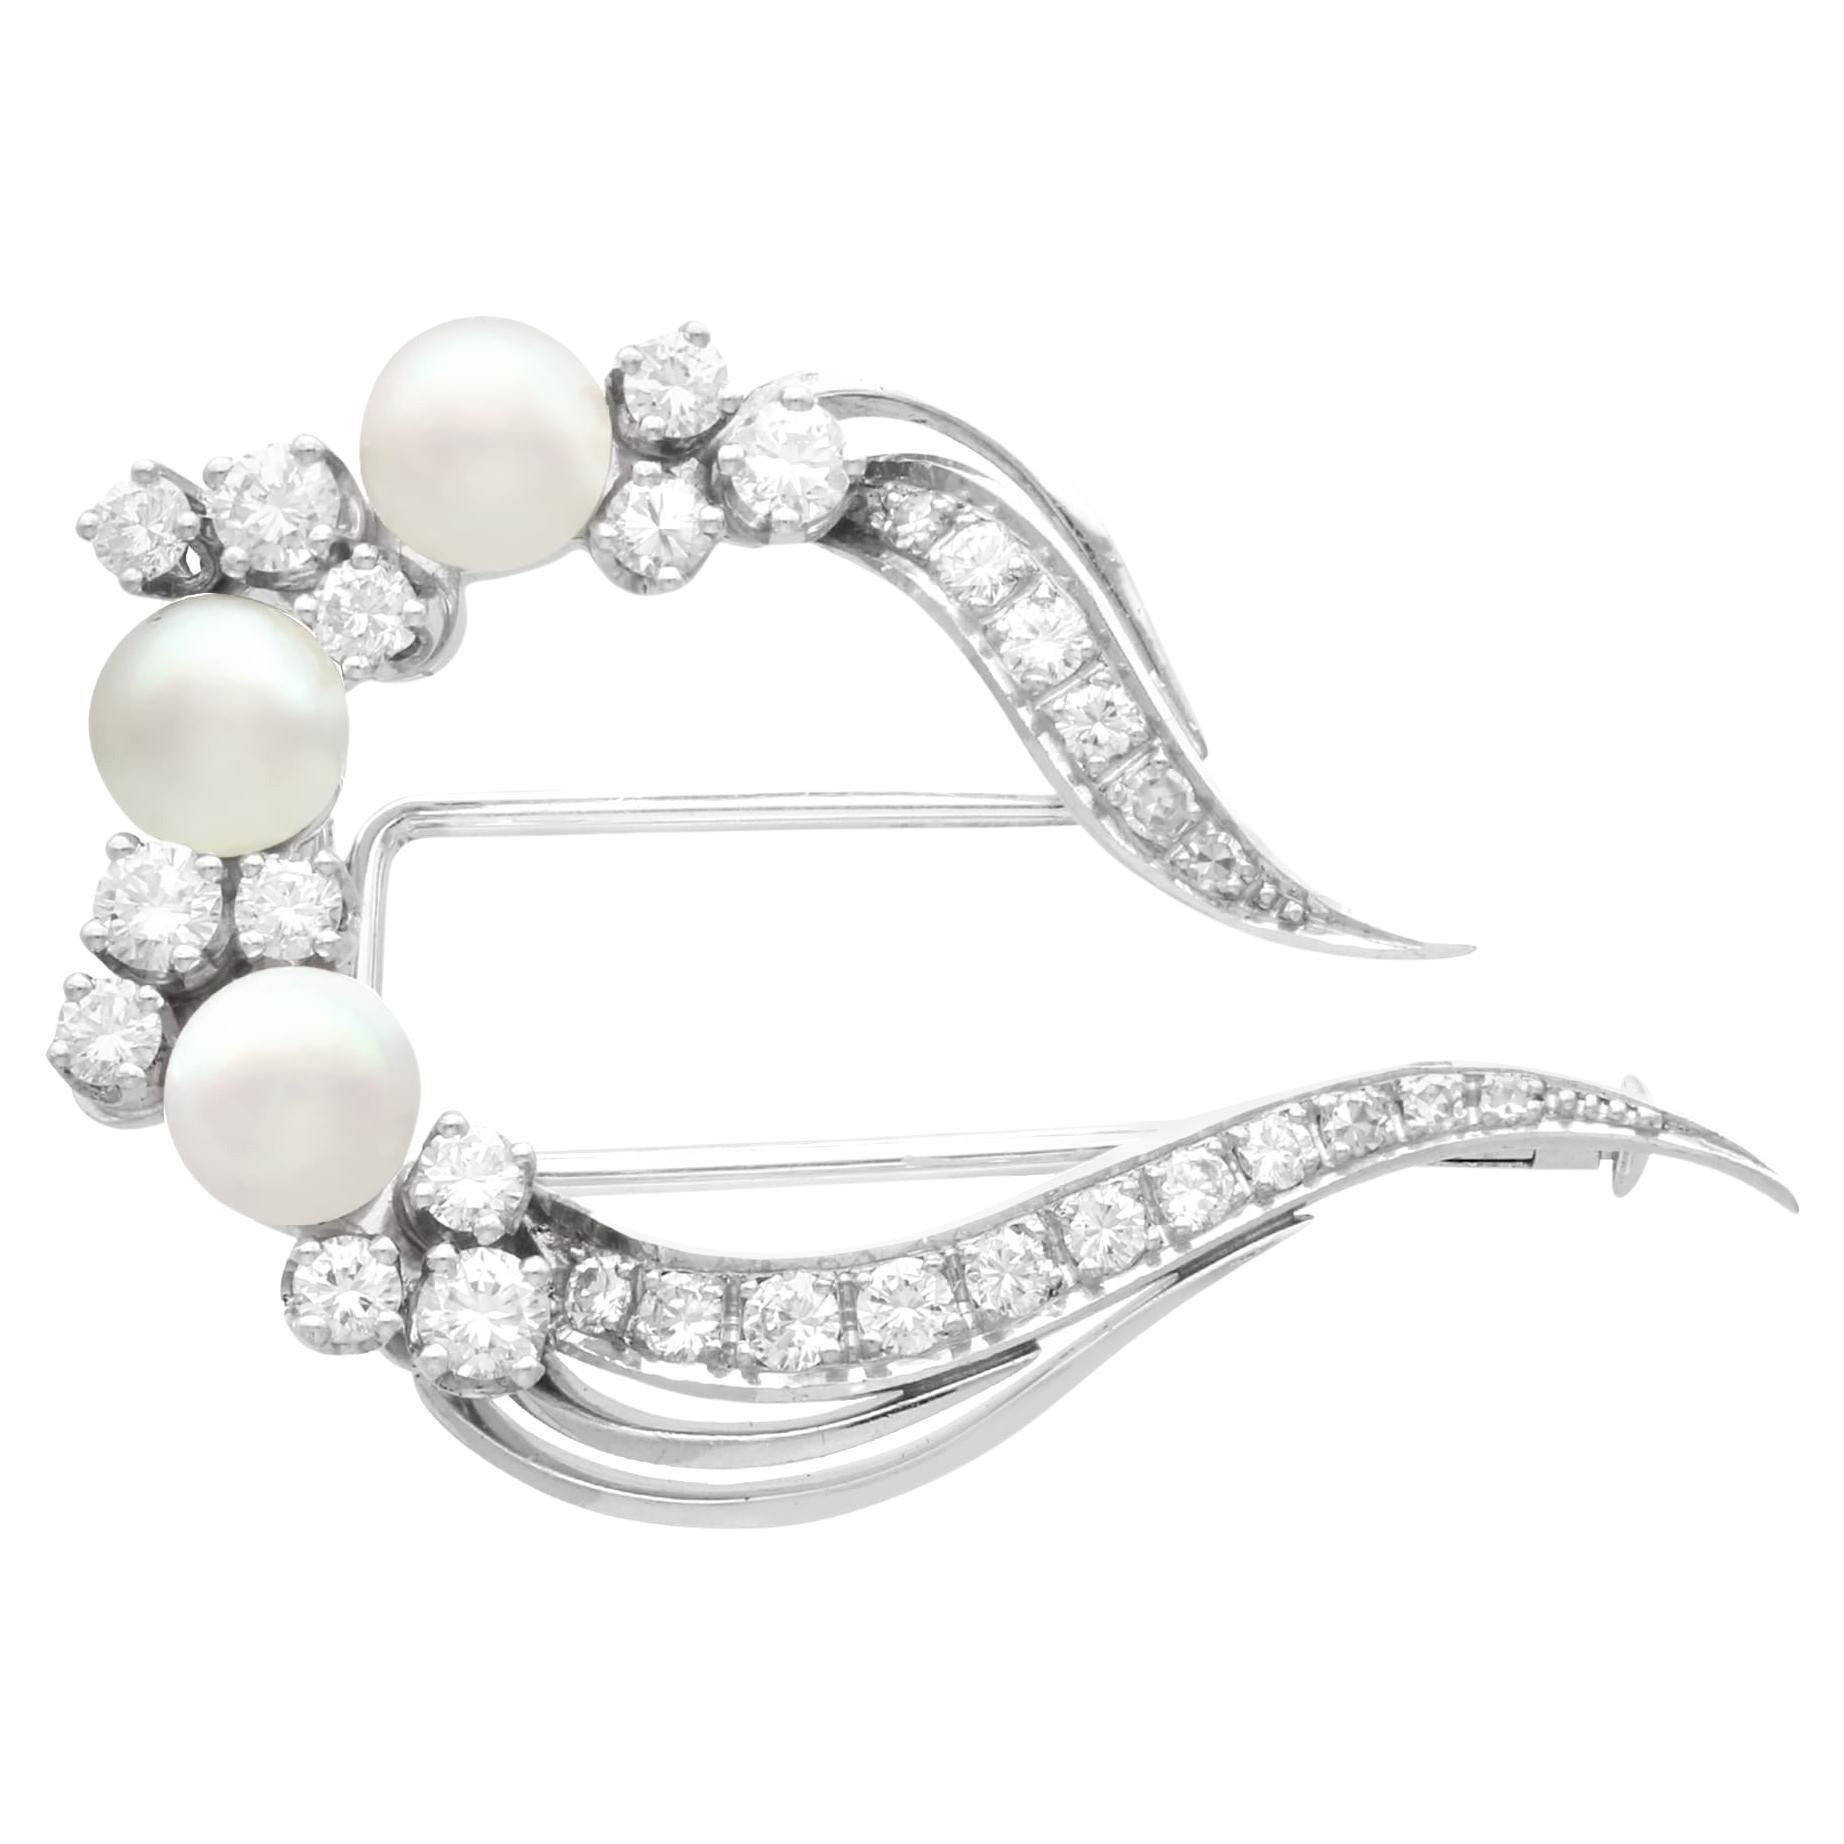 Vintage 1960s Cultured Pearl and 1.15 Carat Diamond 18k White Gold Brooch For Sale